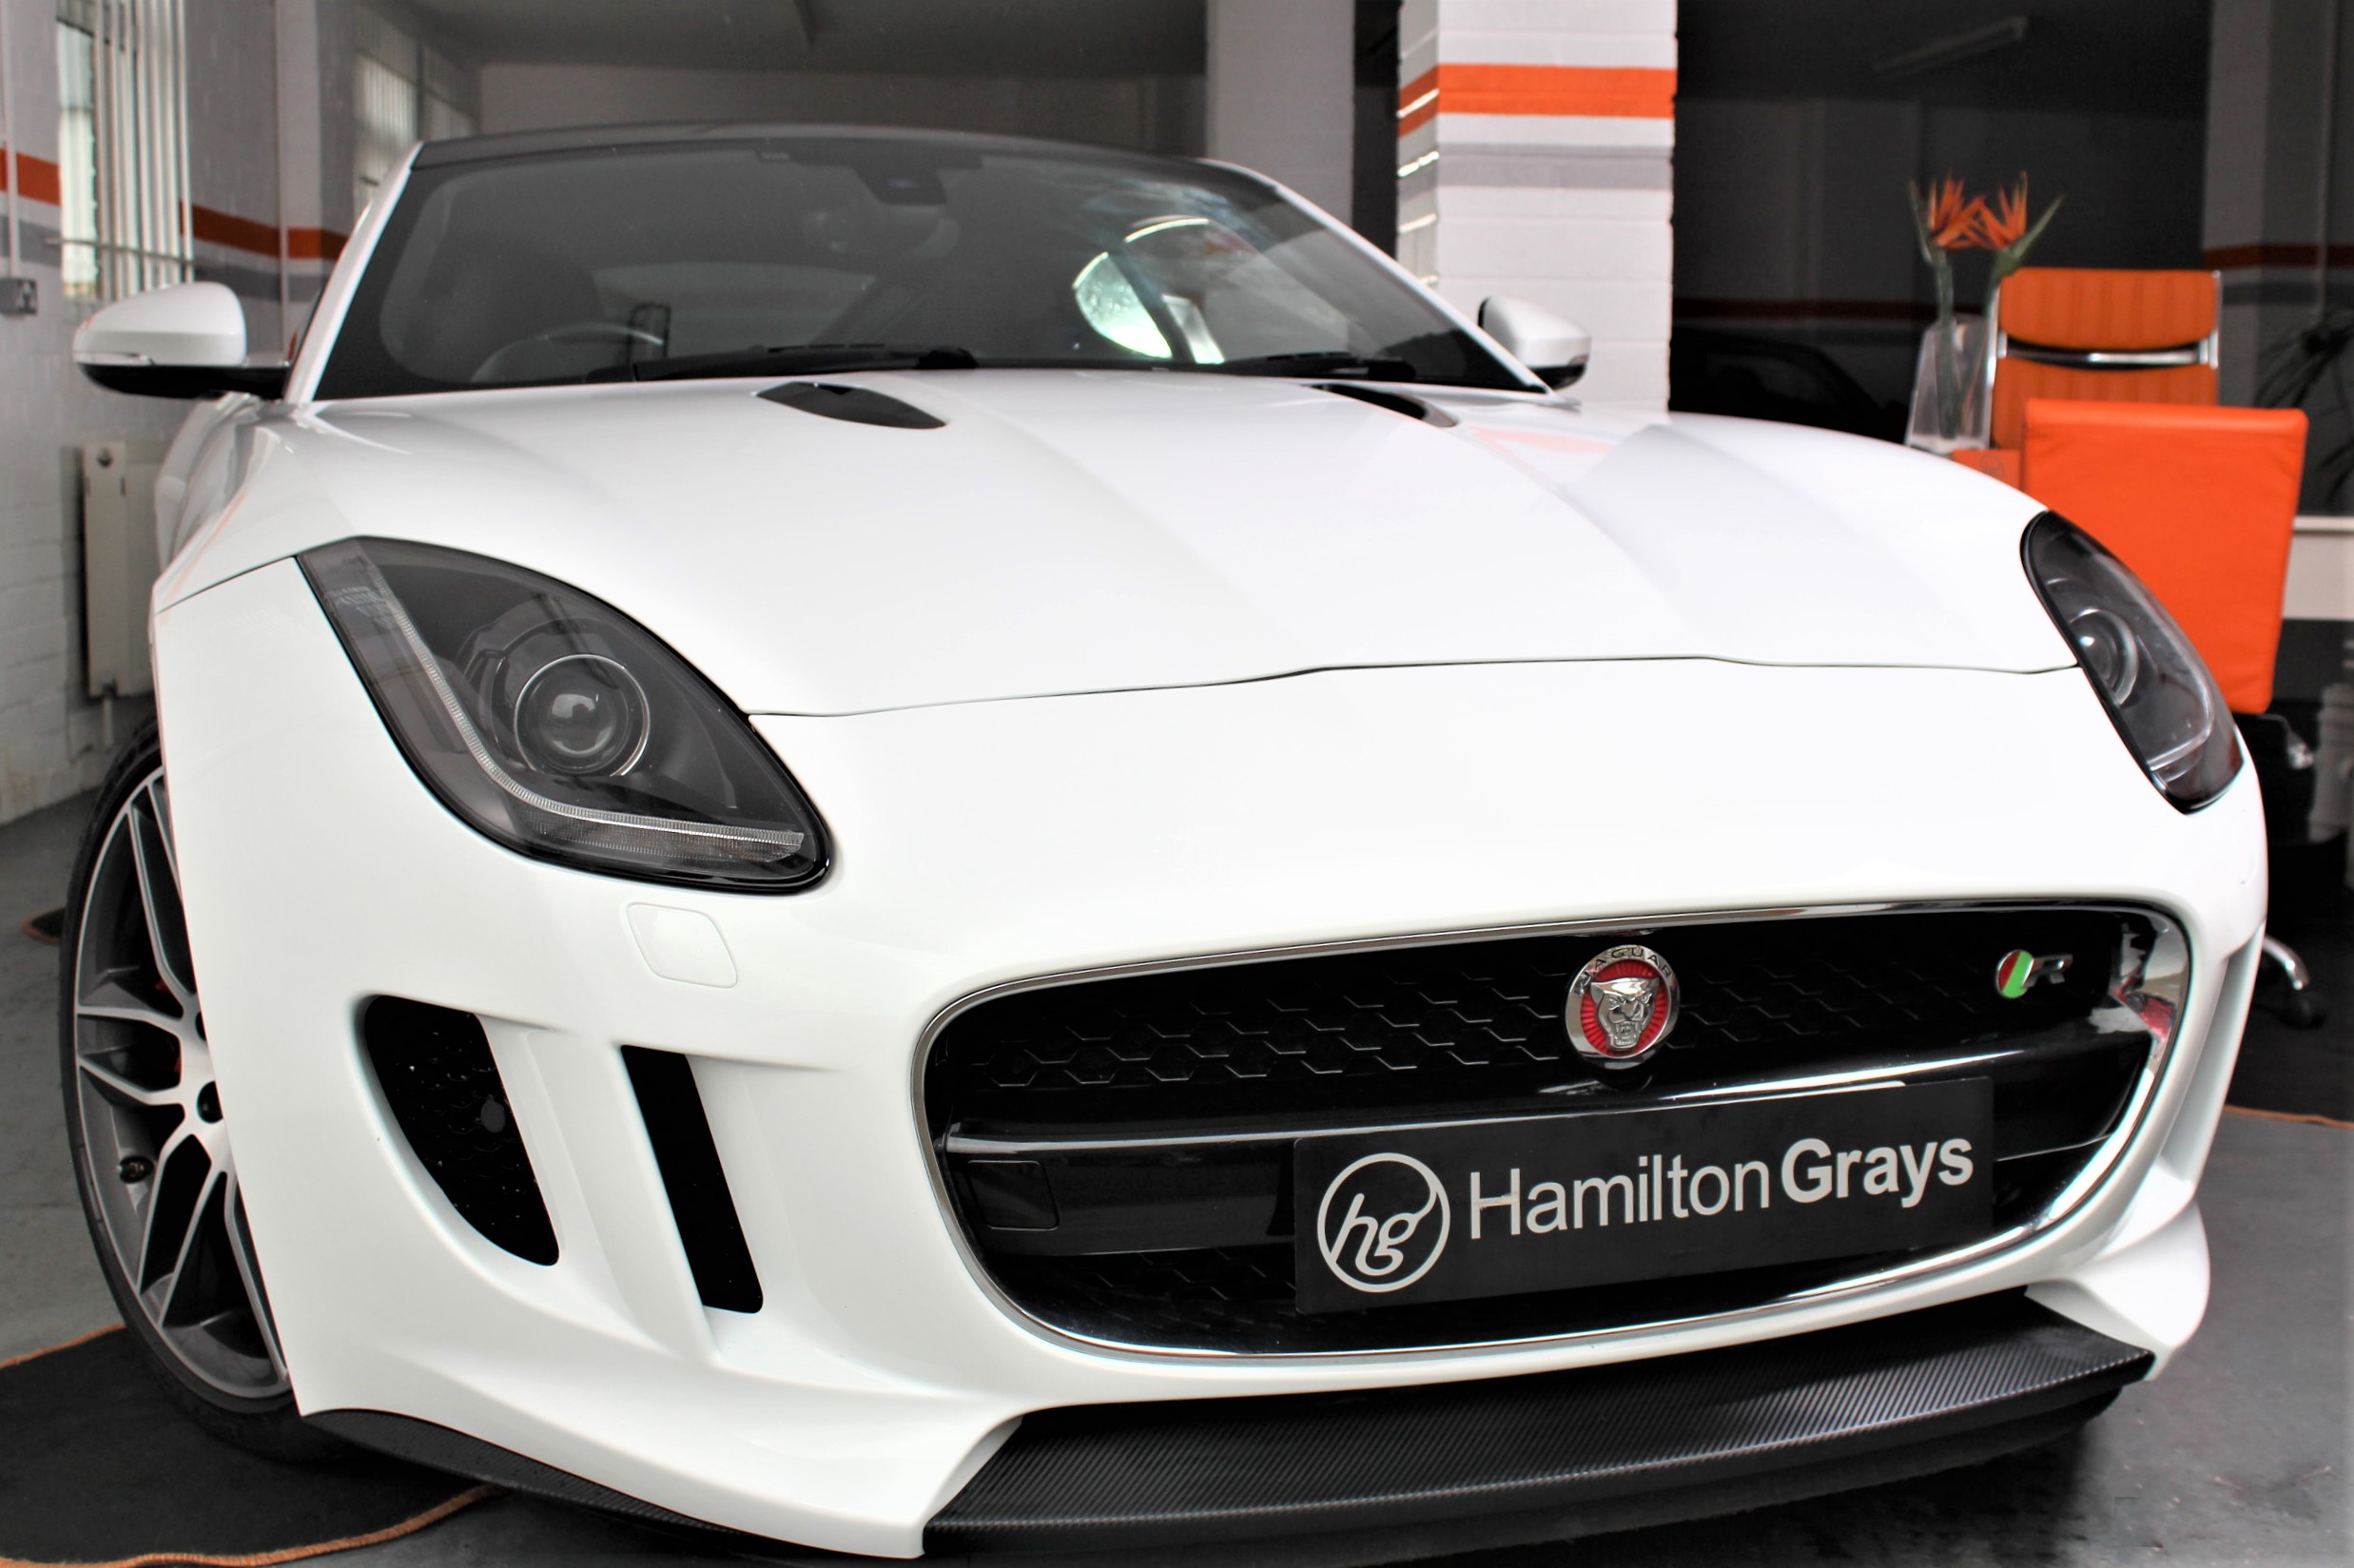 2014 (14) Jaguar F Type 5.0 R Coupe. Polaris White with Full Black Leather. FJSH. 45k. Great Specification. One Former Keeper.. (SOLD)